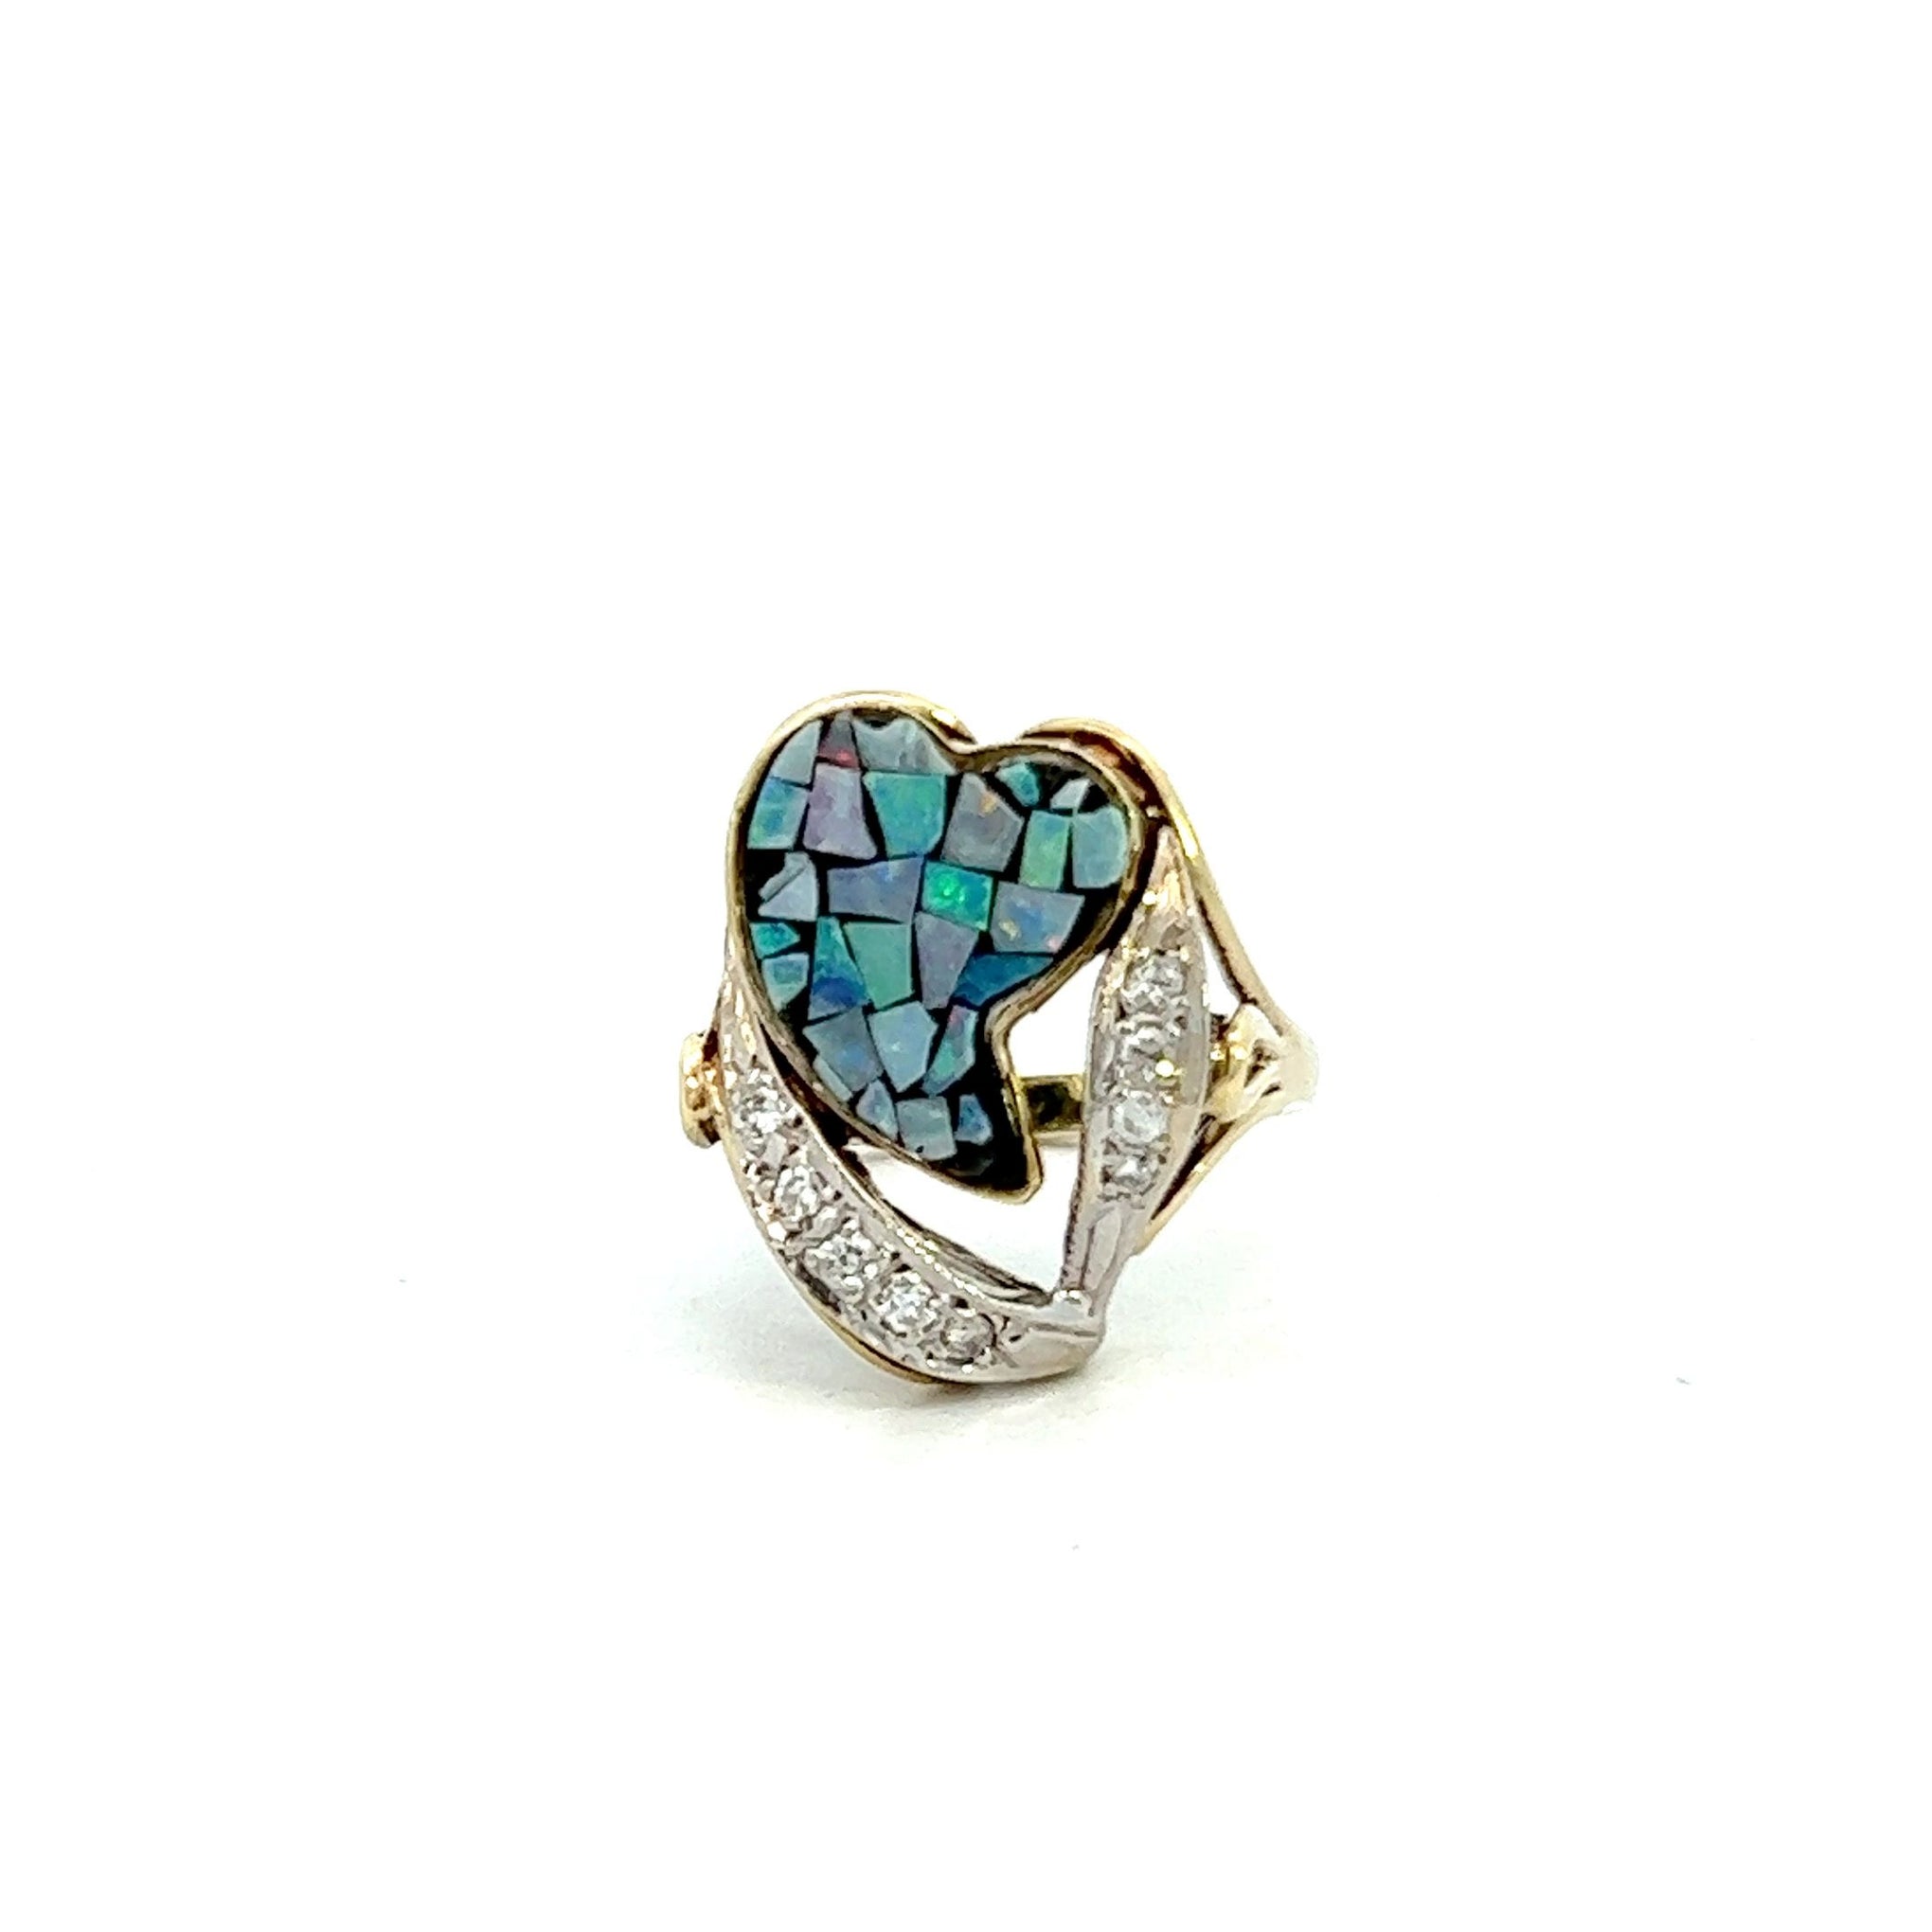 VINTAGE 1970'S MOSAIC OPAL AND DIAMOND HEART RING